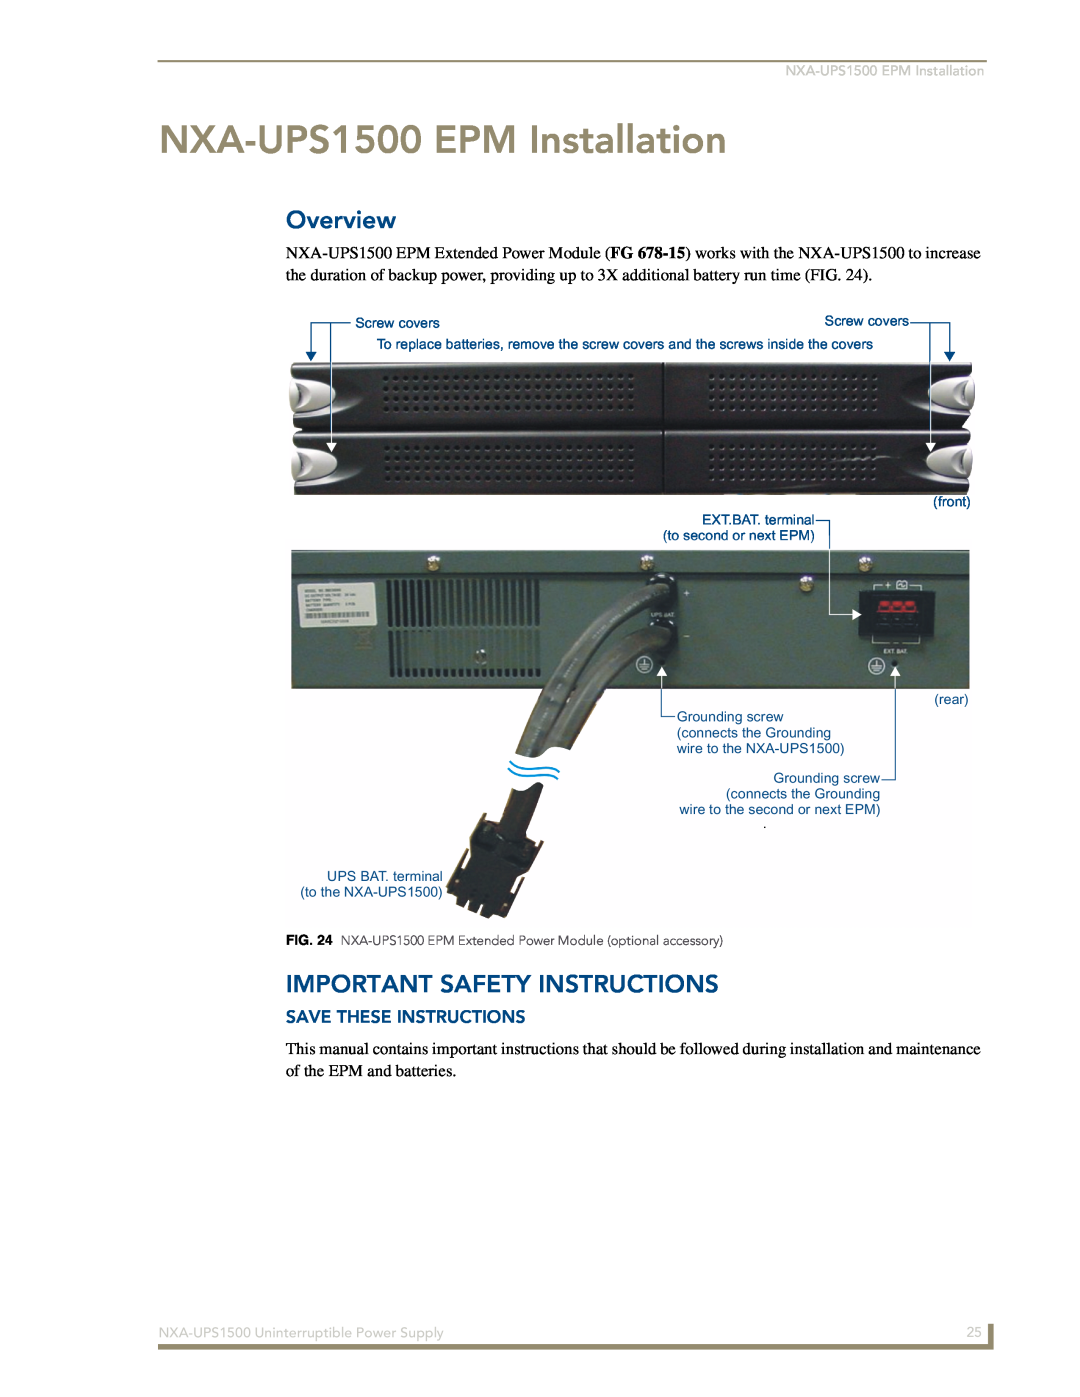 AMX manual NXA-UPS1500 EPM Installation, Important Safety Instructions, Overview, Save These Instructions 